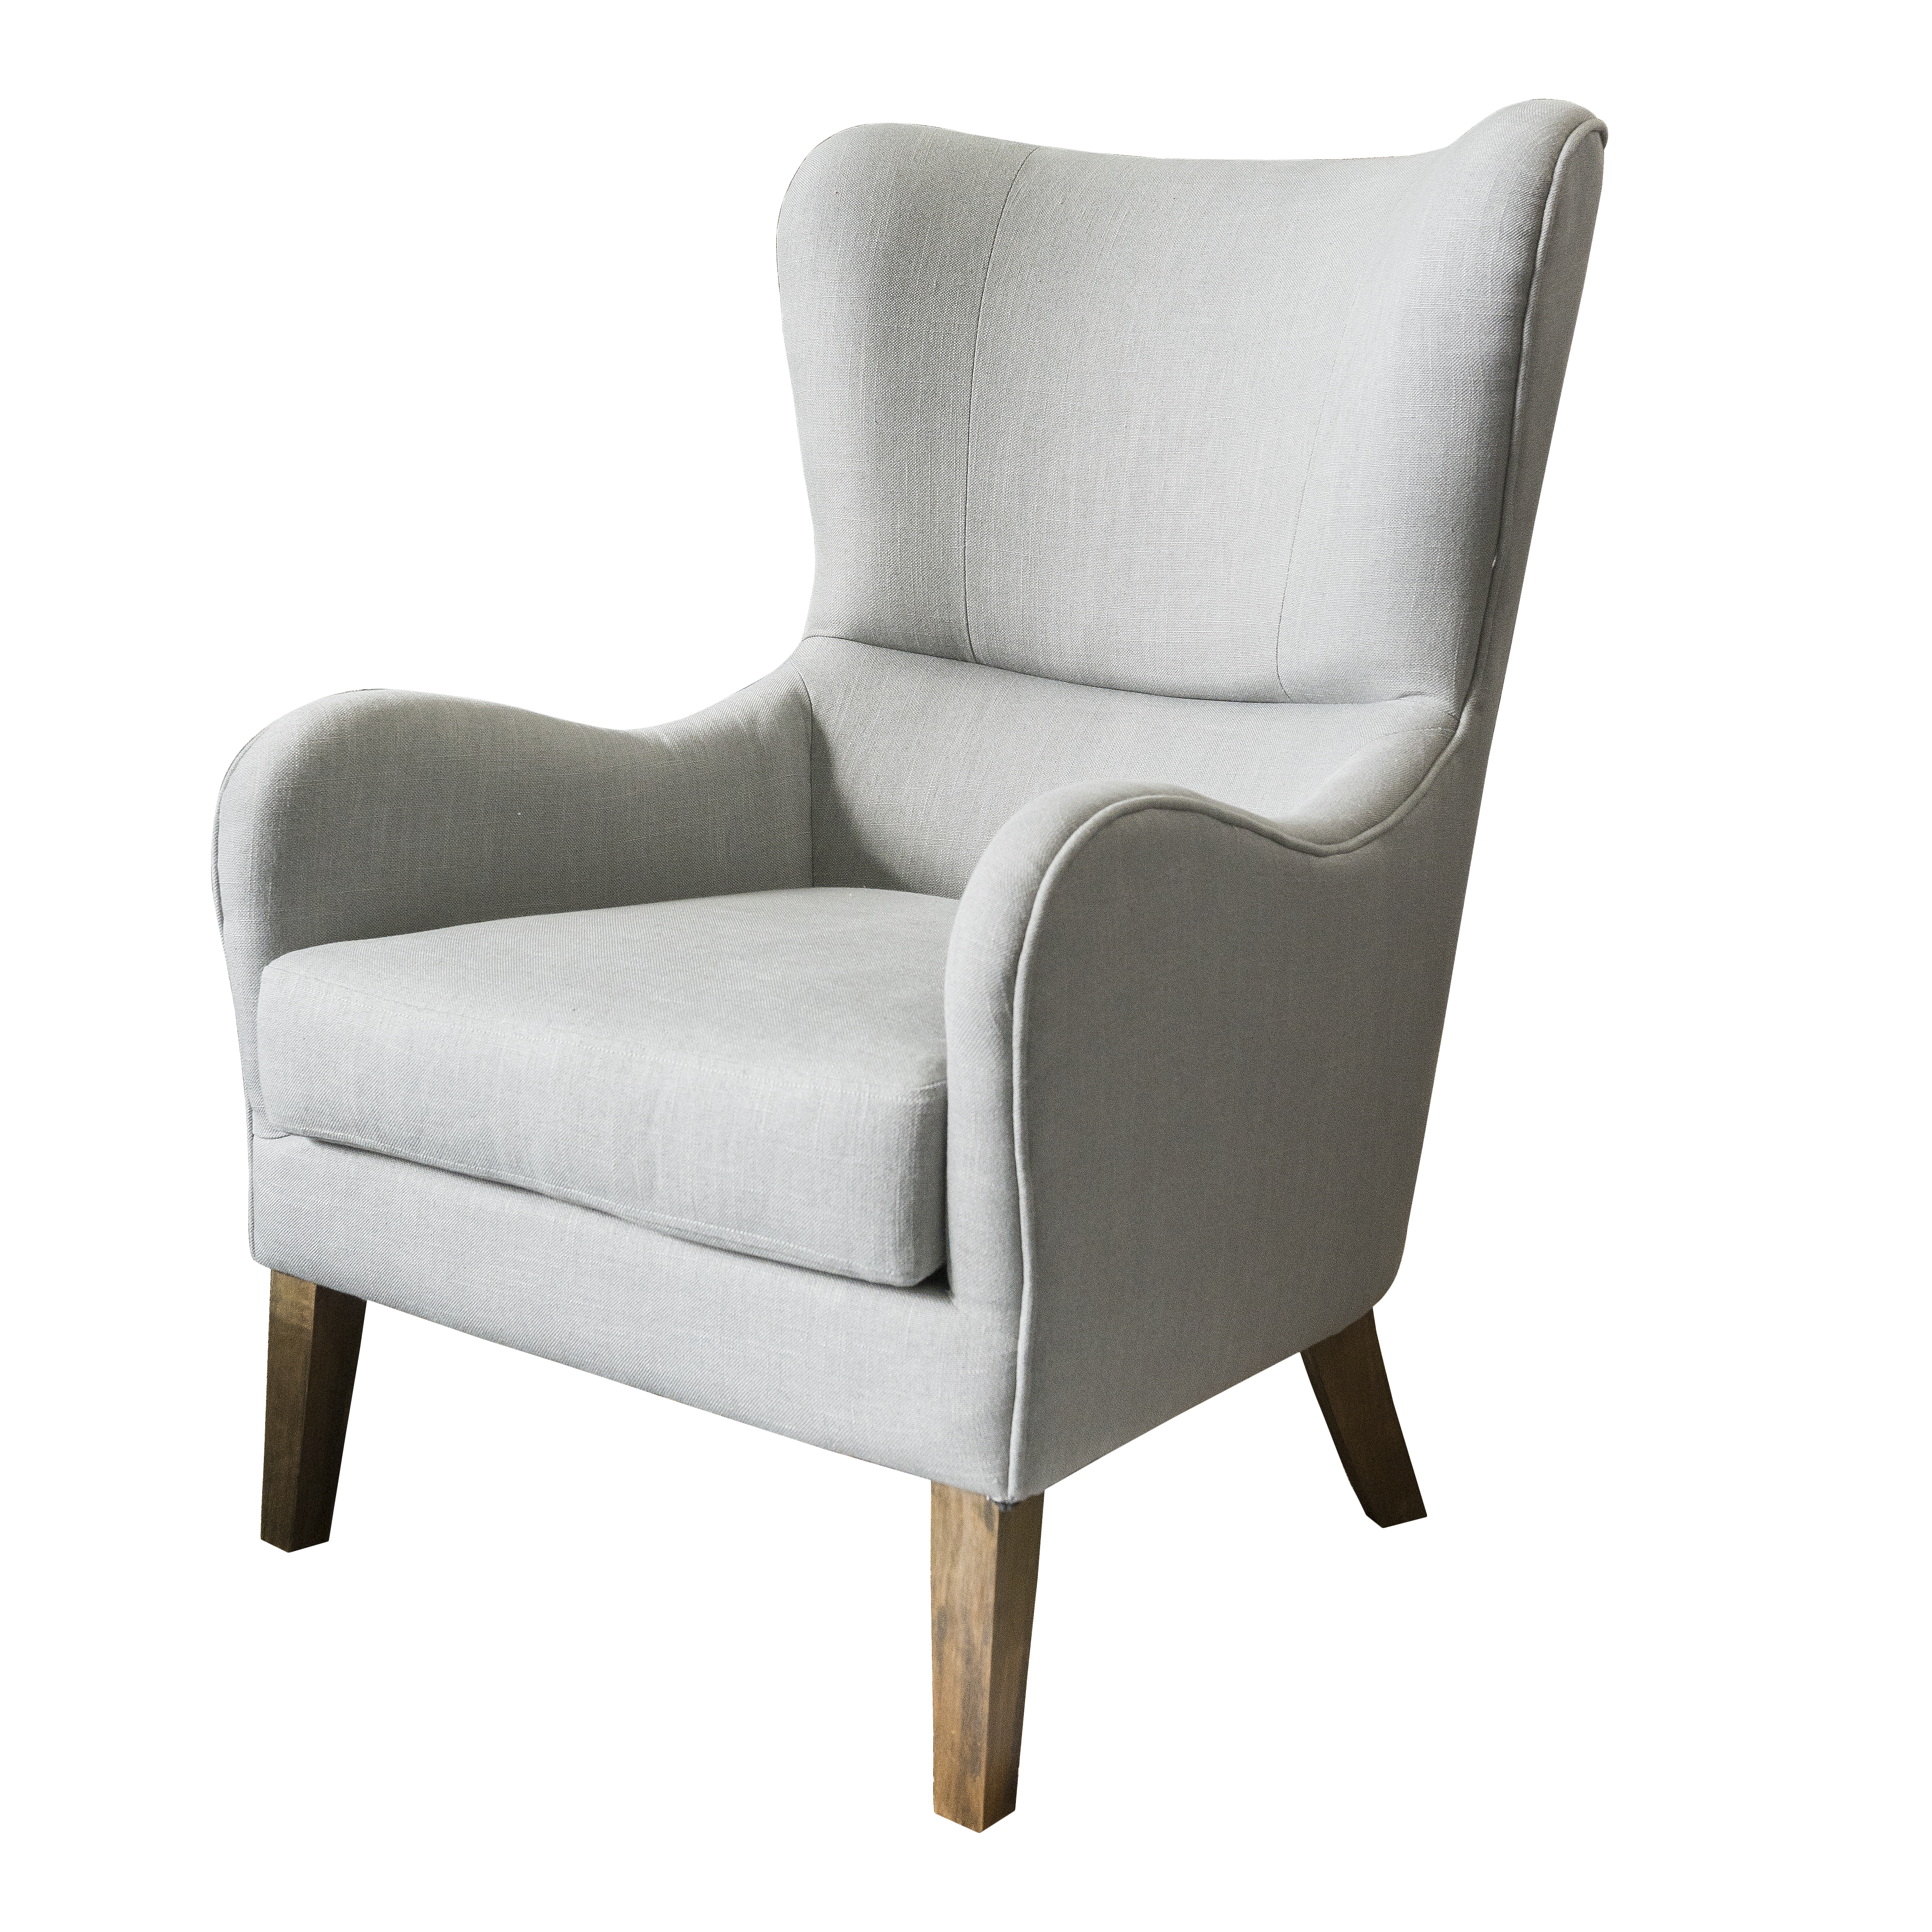 Accent chair “Victoria” in Light Grey Linen-Blend Fabric